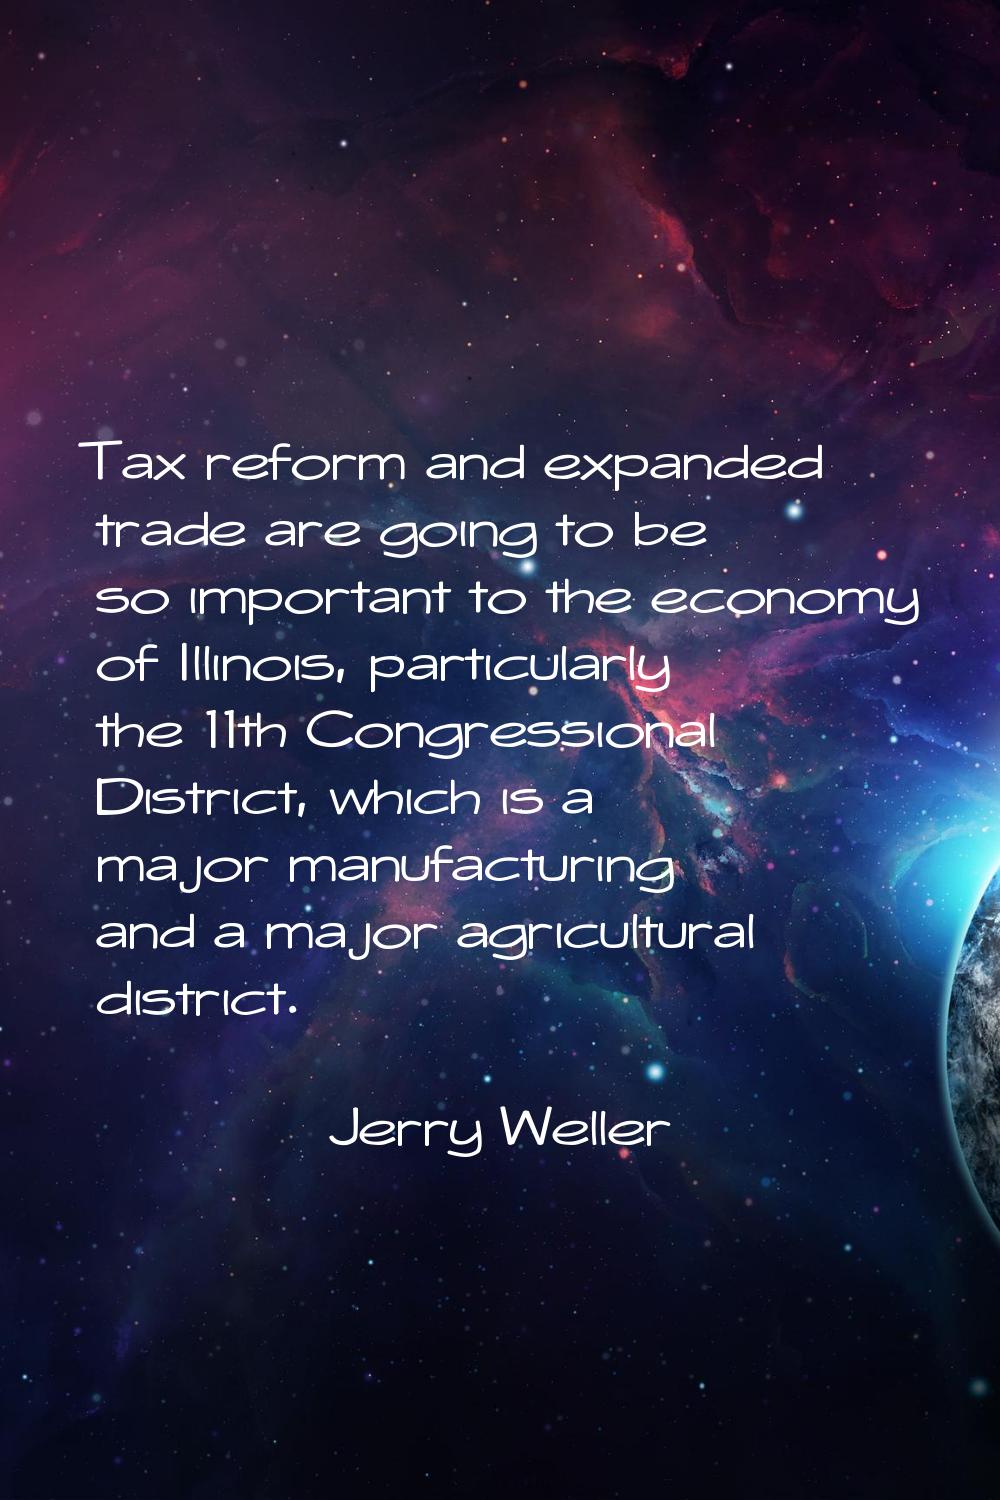 Tax reform and expanded trade are going to be so important to the economy of Illinois, particularly